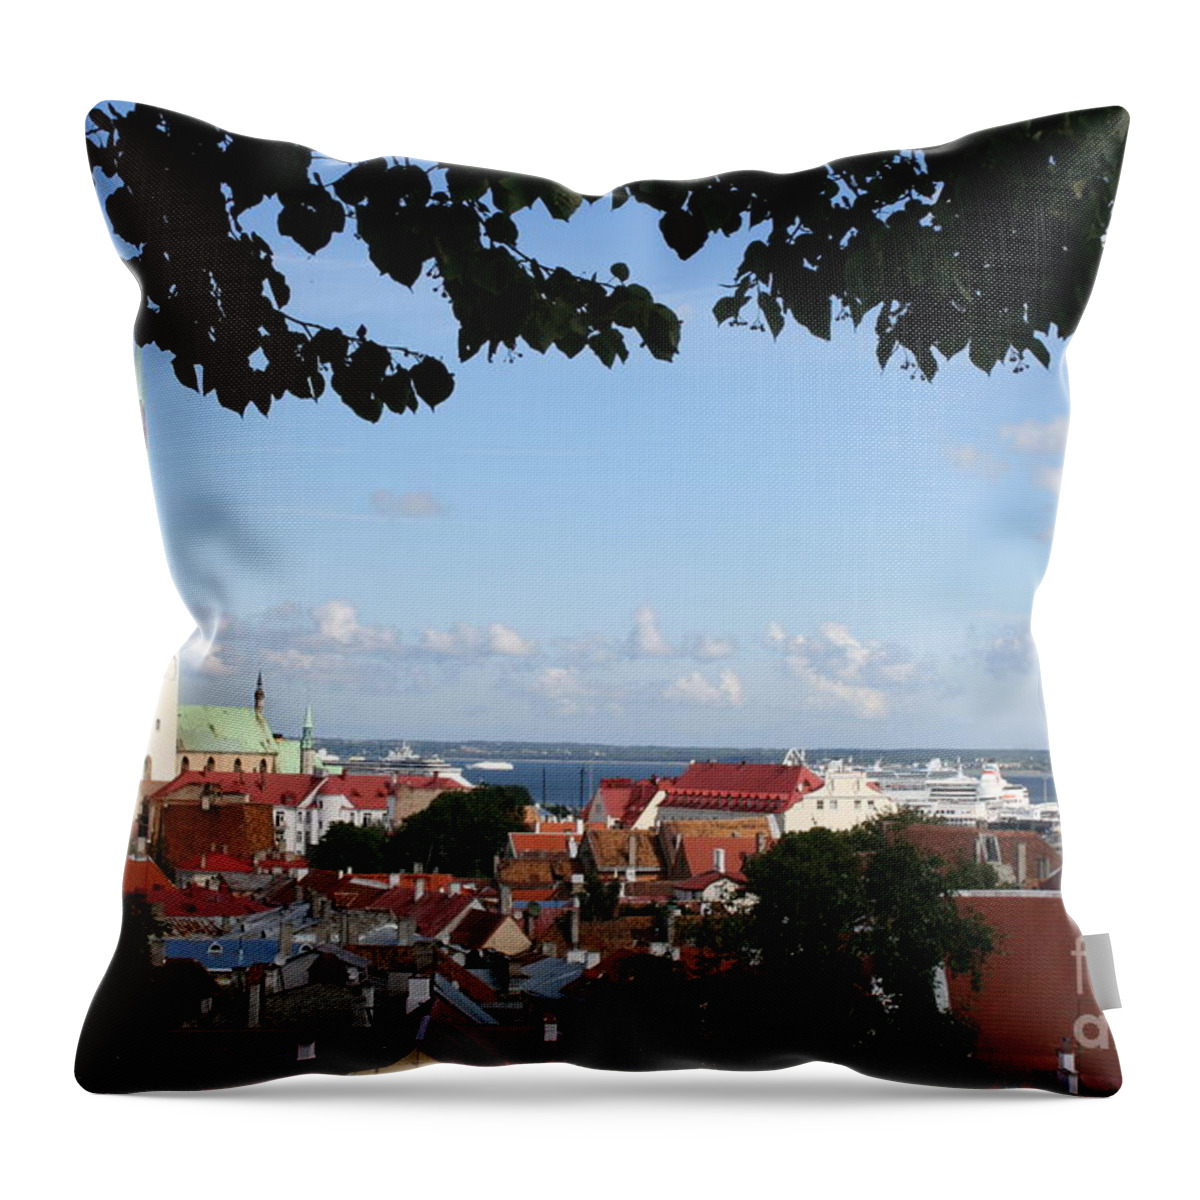 Old Town Throw Pillow featuring the photograph Old Town And Harbor - Tallinn by Christiane Schulze Art And Photography